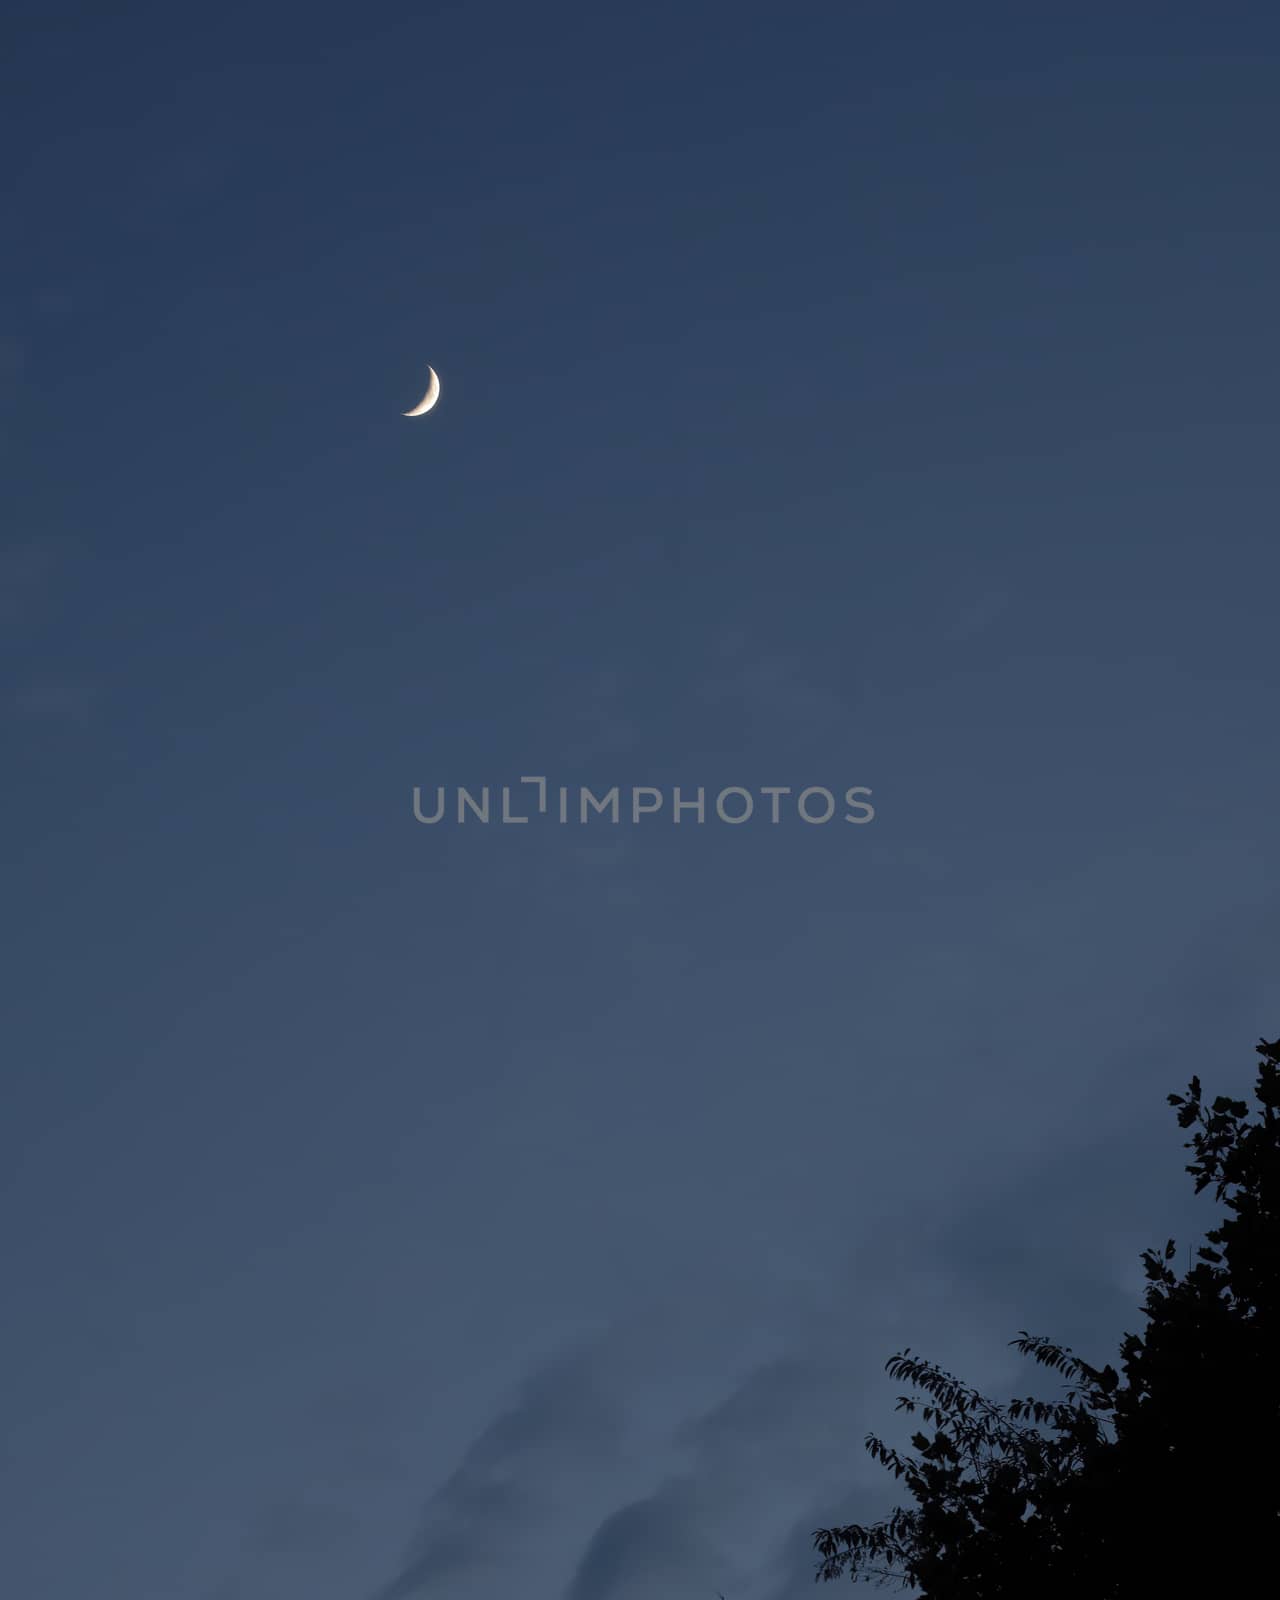 Waxing Crescent Moon over the Treeline by CharlieFloyd